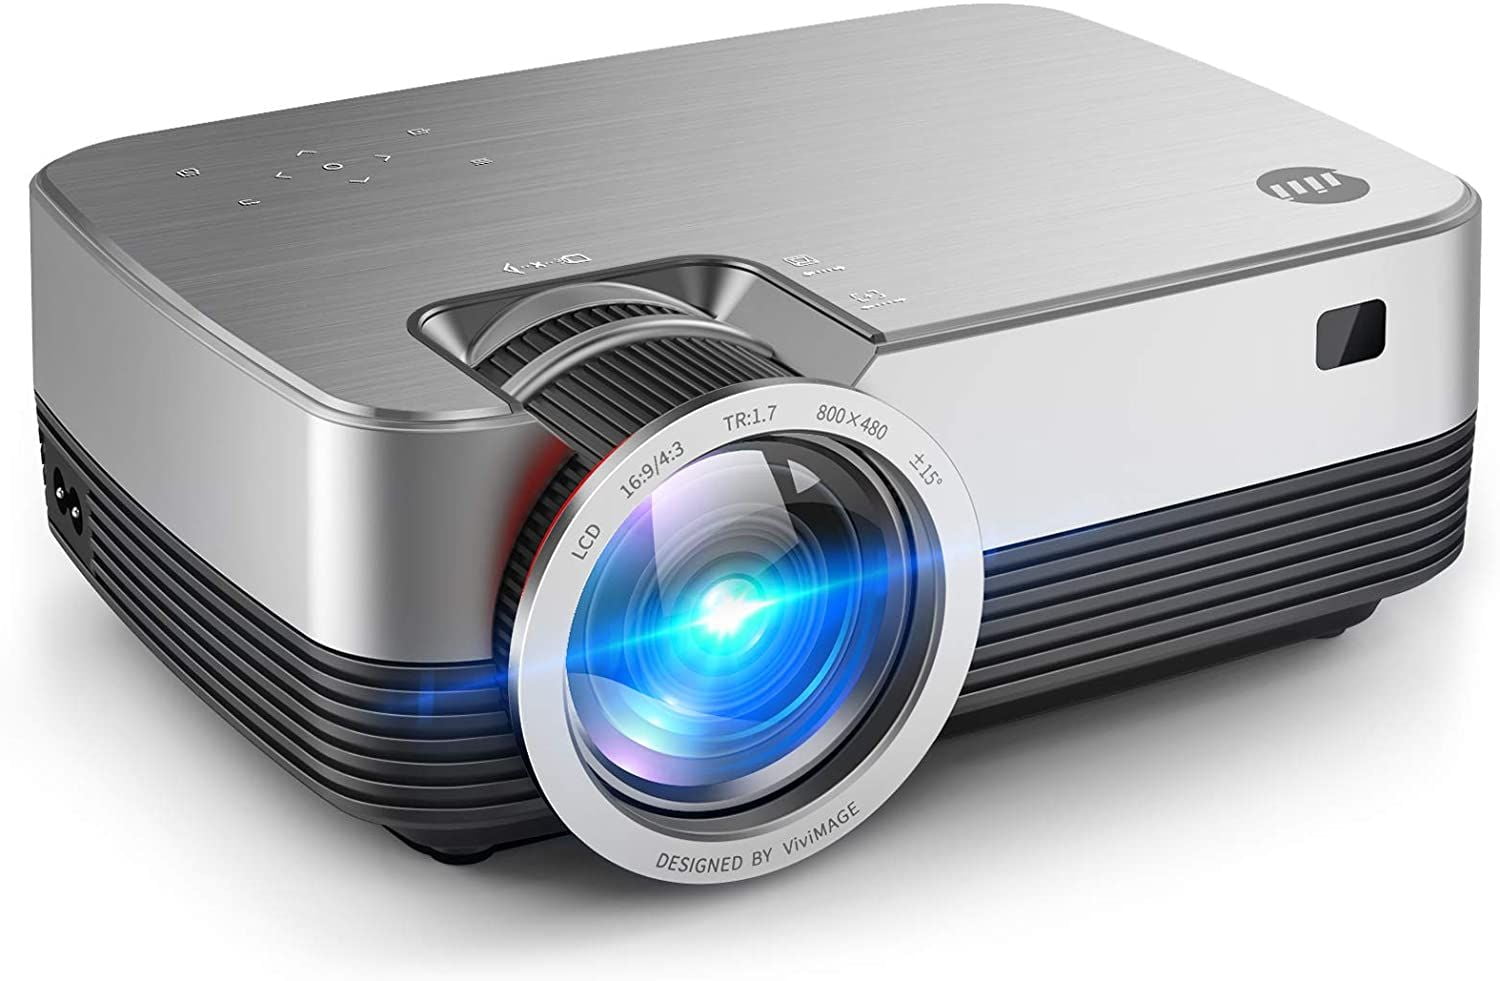 VIVIMAGE Cinemoon 580 Projector1080P Supported 4000 Lux High Brightness Video Projector with 200 Projection Size Includes HDMI Cable 